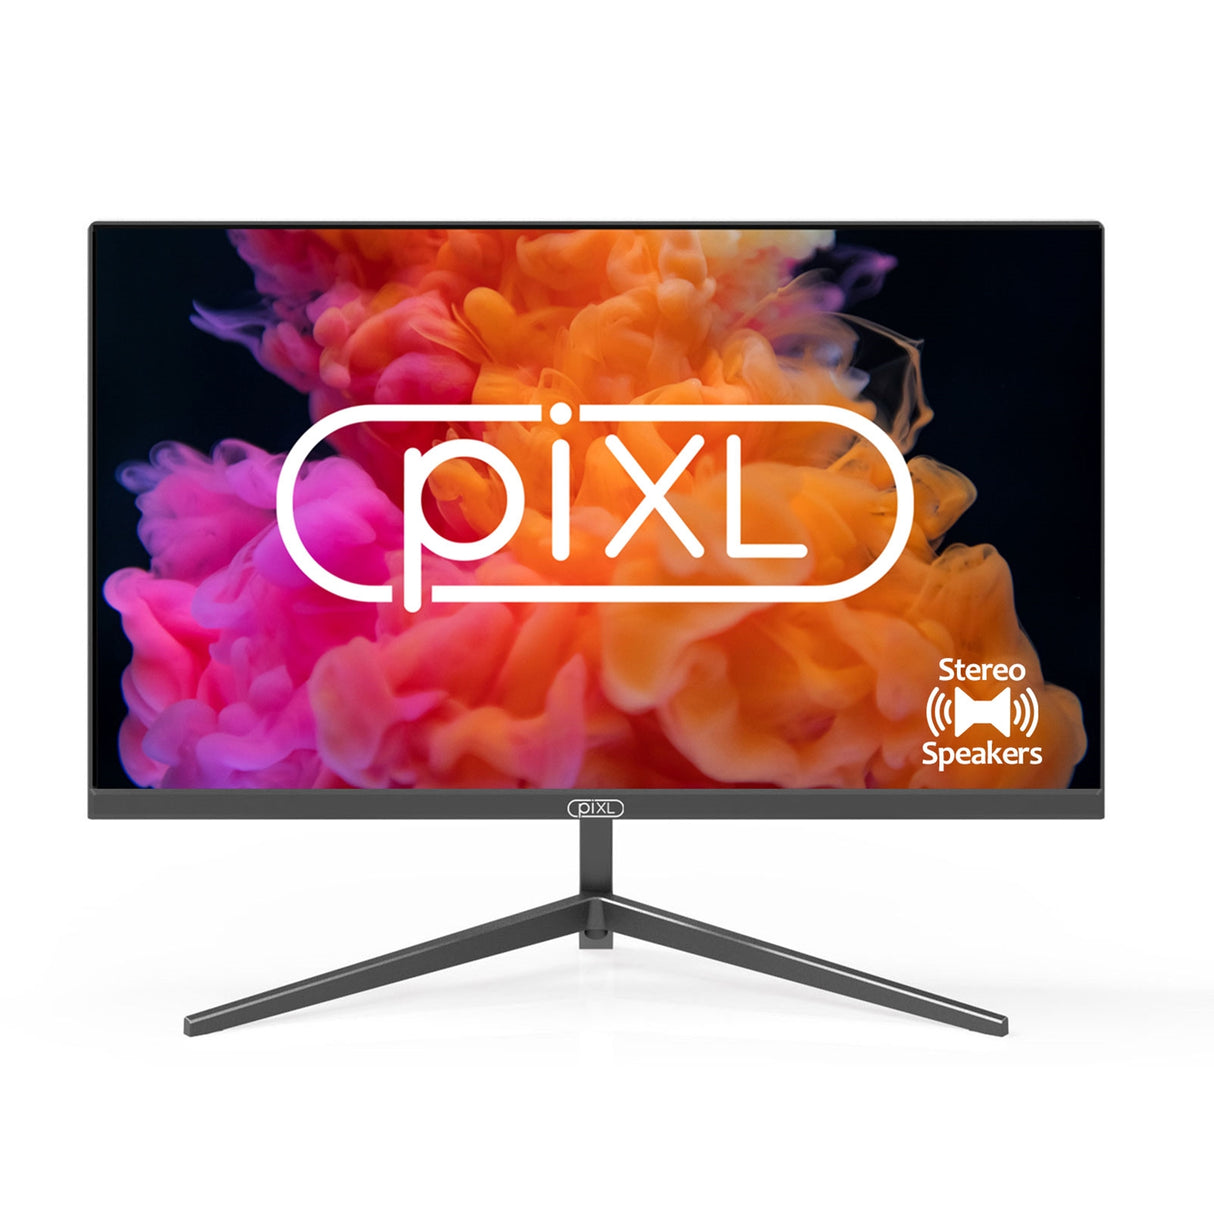 piXL PXD24VH 24 Inch Frameless Monitor, Widescreen, 6.5ms Response Time, 60Hz Refresh Rate, Full HD 1920 x 1280, 16:10 Aspect Ratio, VGA, HDMI, Internal PSU, Speakers, 16.7 Million Colour Support, Black Finish